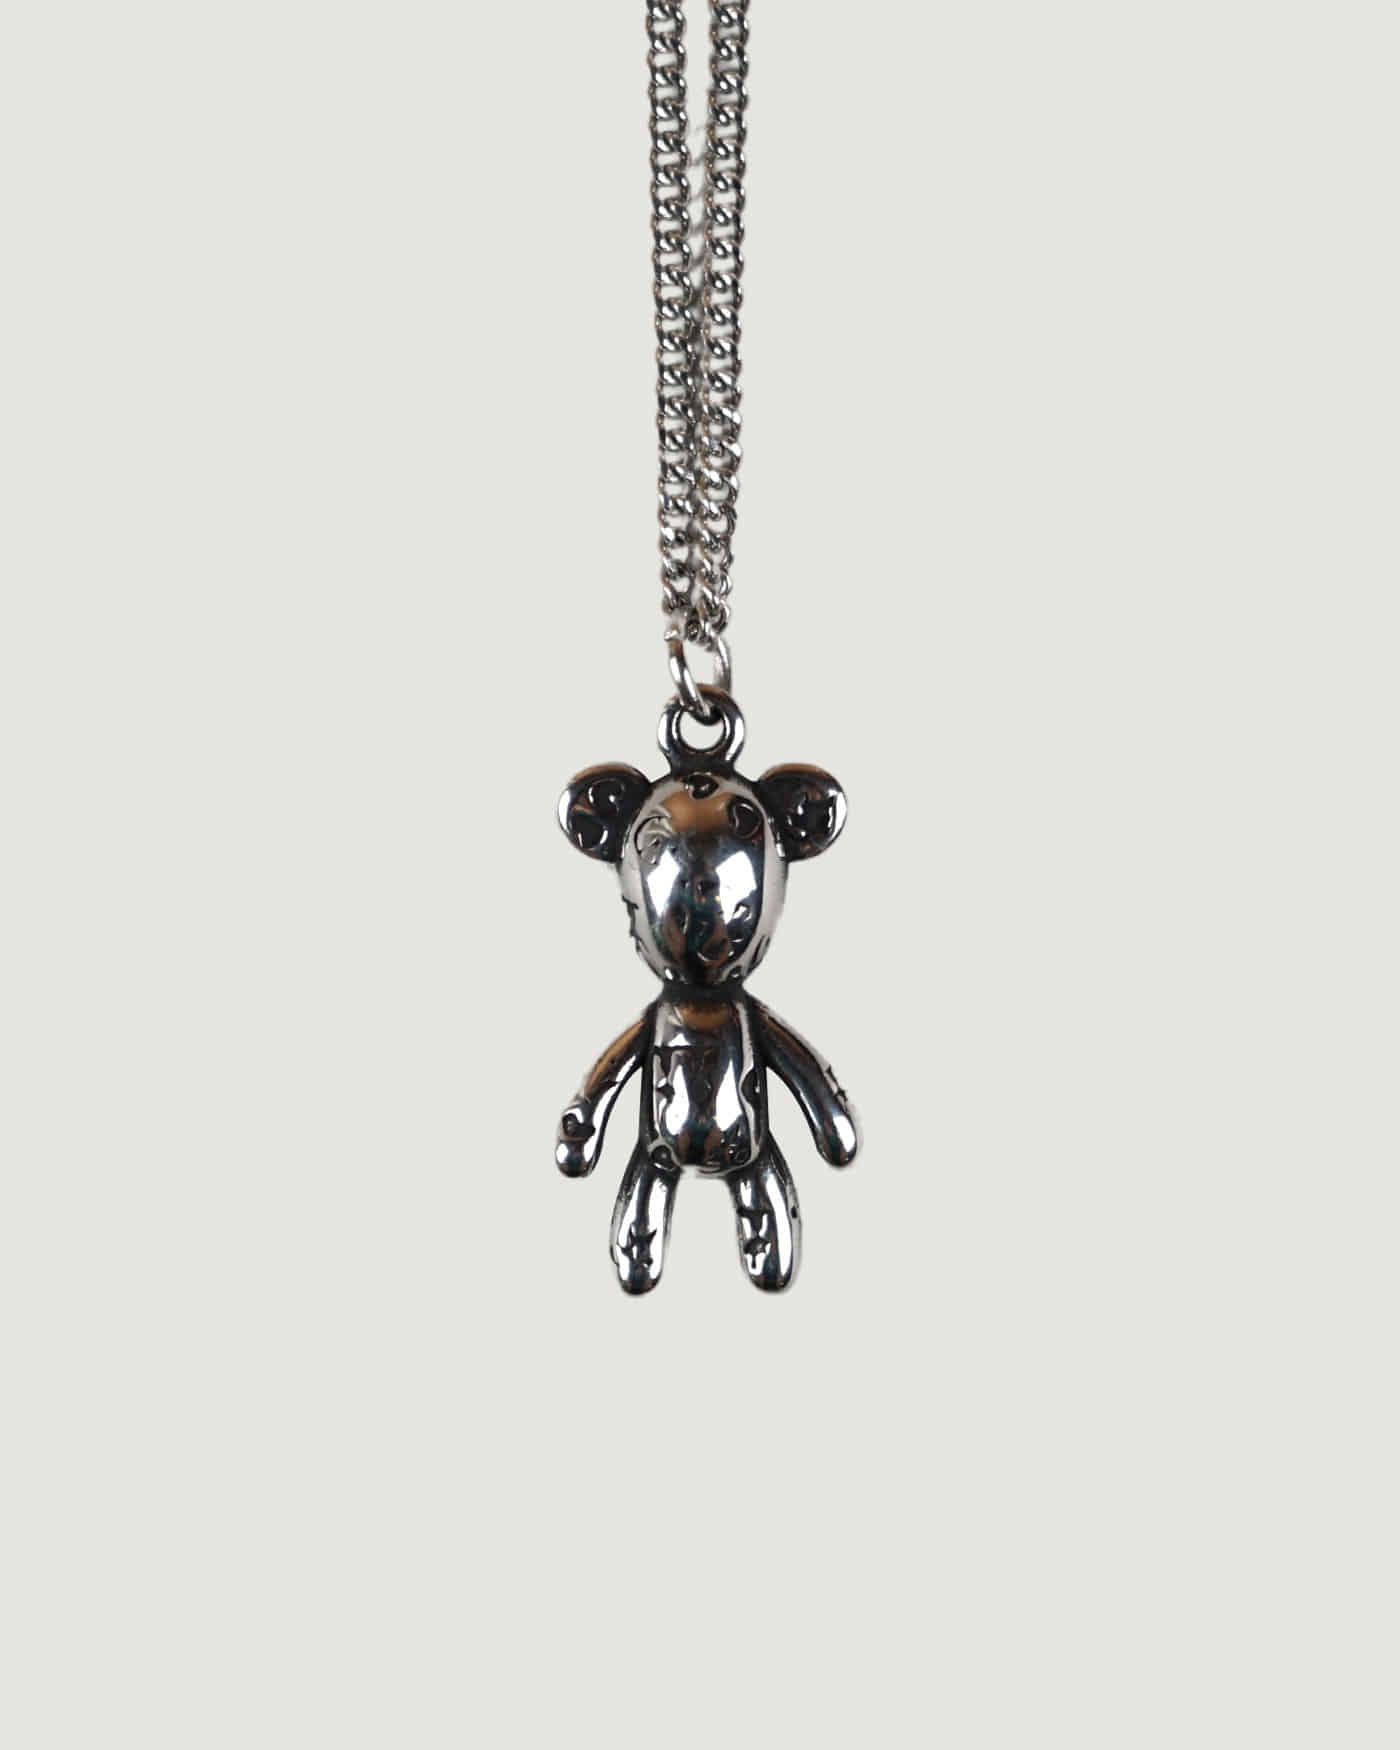 THE BEAR NECKLACE